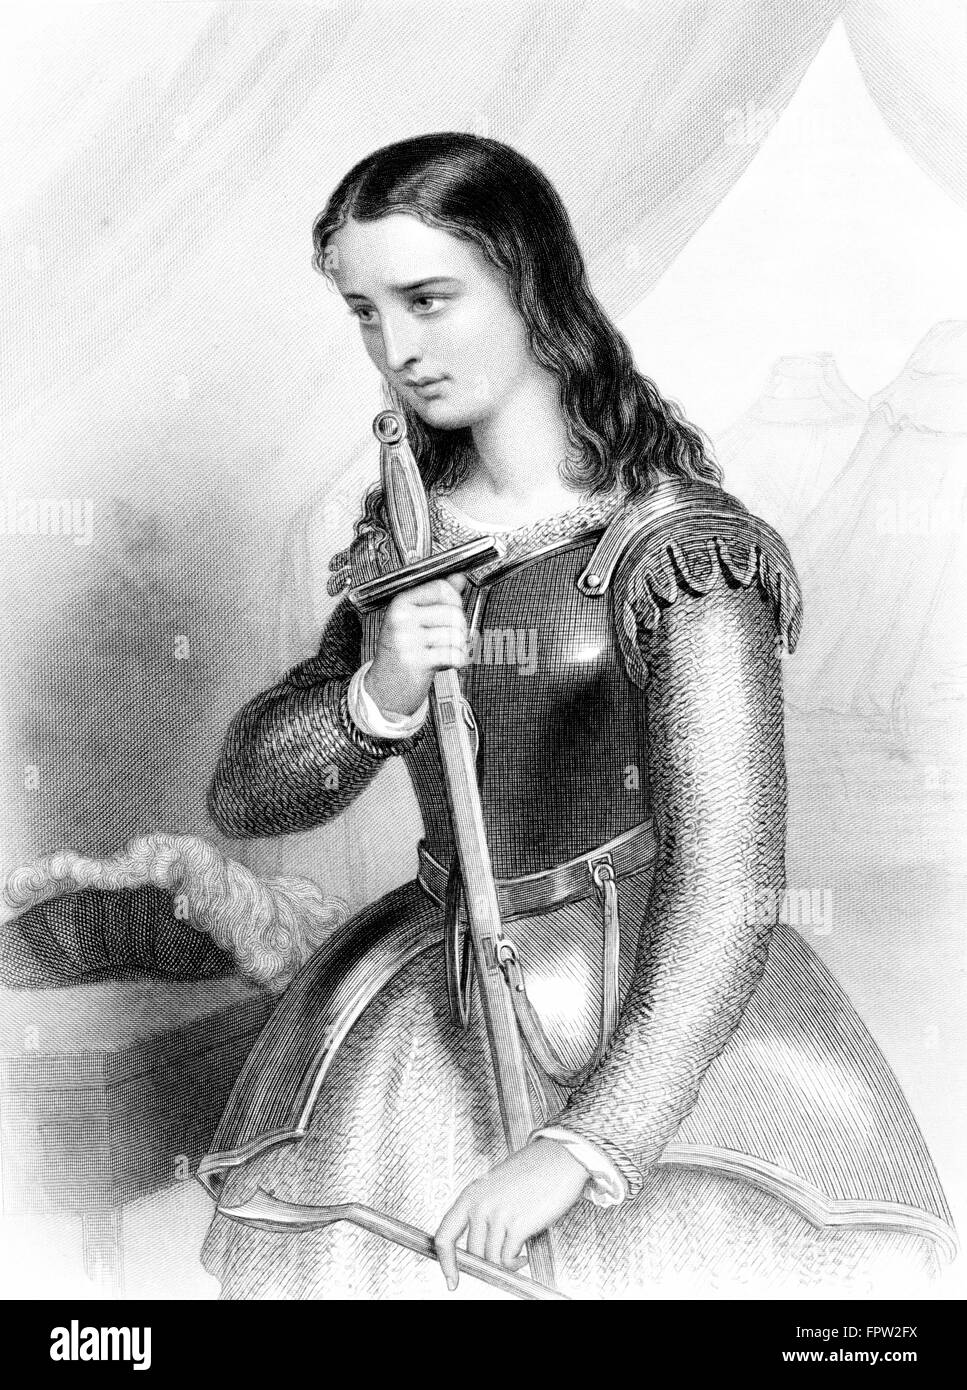 1400s JOAN OF ARC JEANNE D'ARC MAID OF ORLEANS FRENCH MILITARY LEADER HEROINE SIEGE OF ORLEANS 1429 SHOWN WITH SWORD AND ARMOR Stock Photo